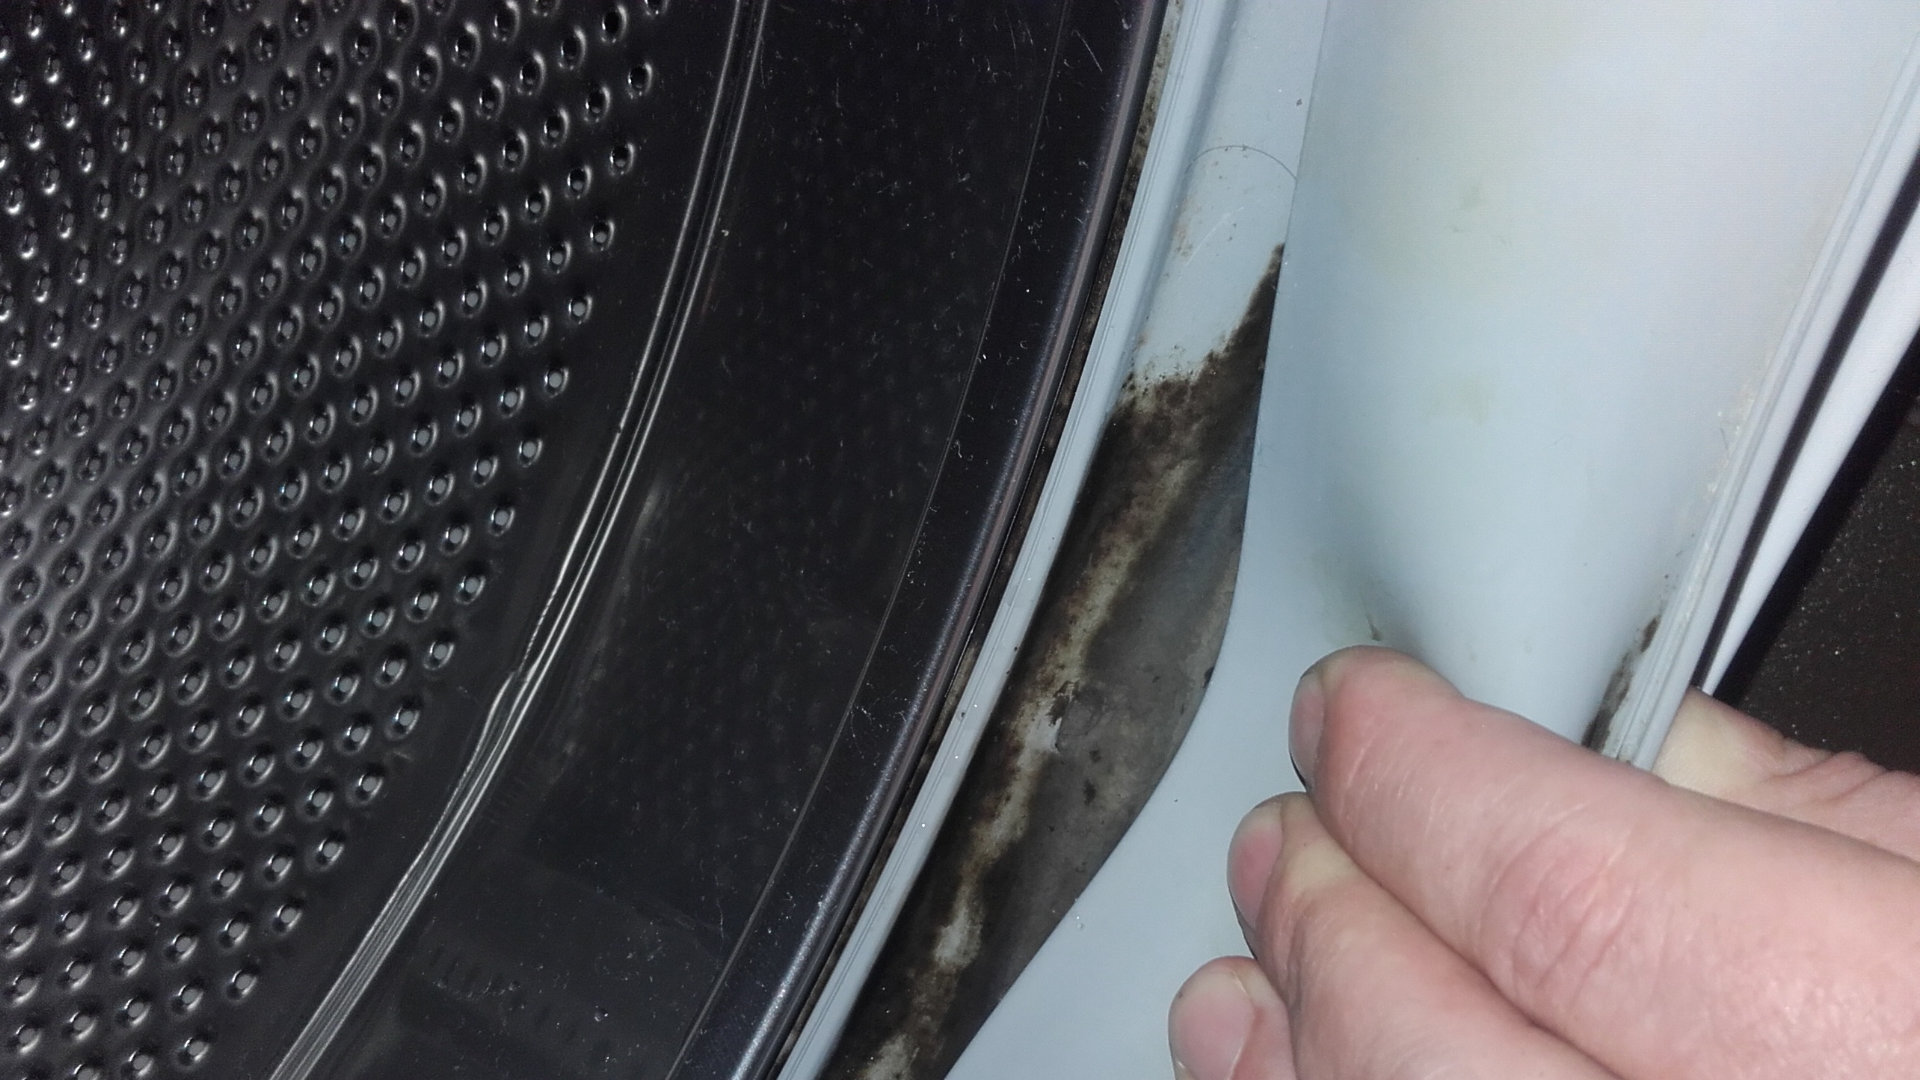 7 Signs that Mold is Growing Inside Your Appliance Water Lines and Pipes - Appliance Express